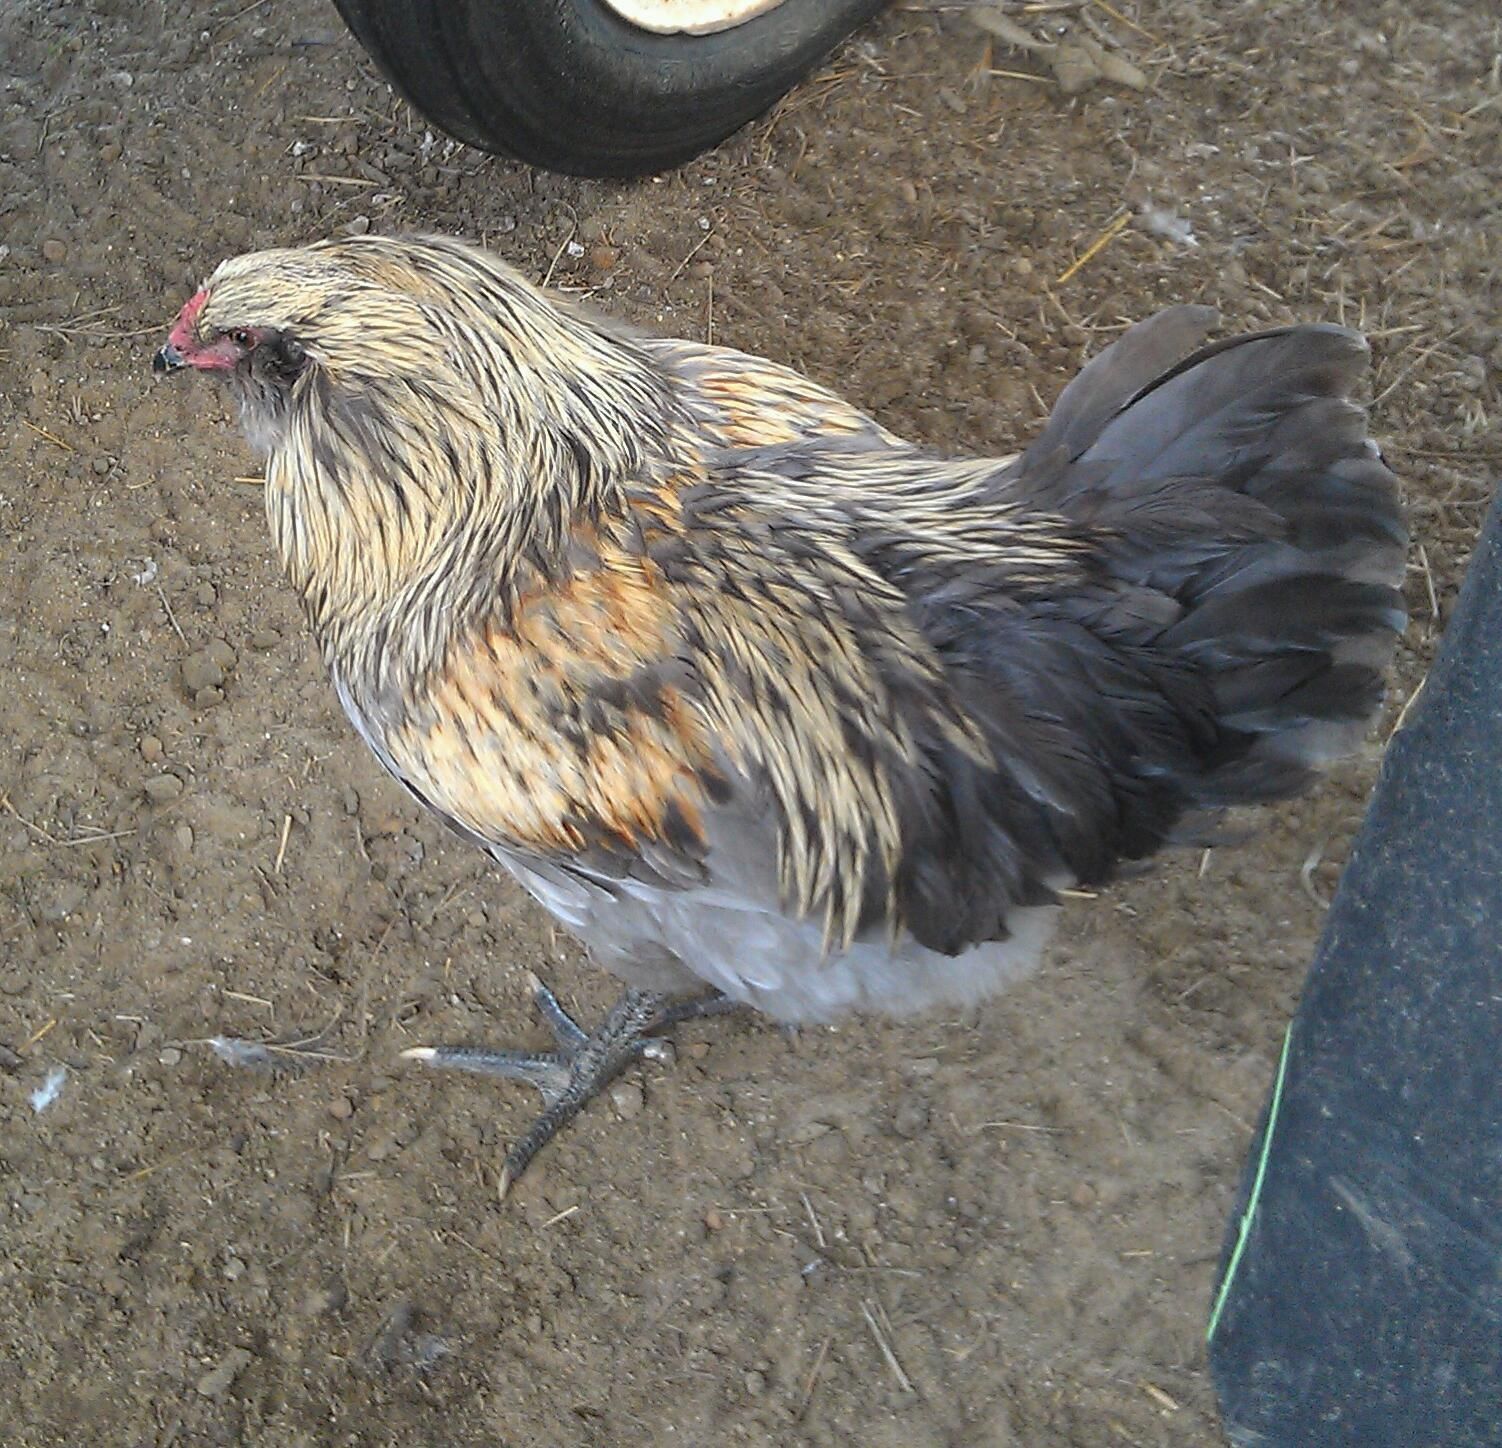 Lemmy EE Rooster